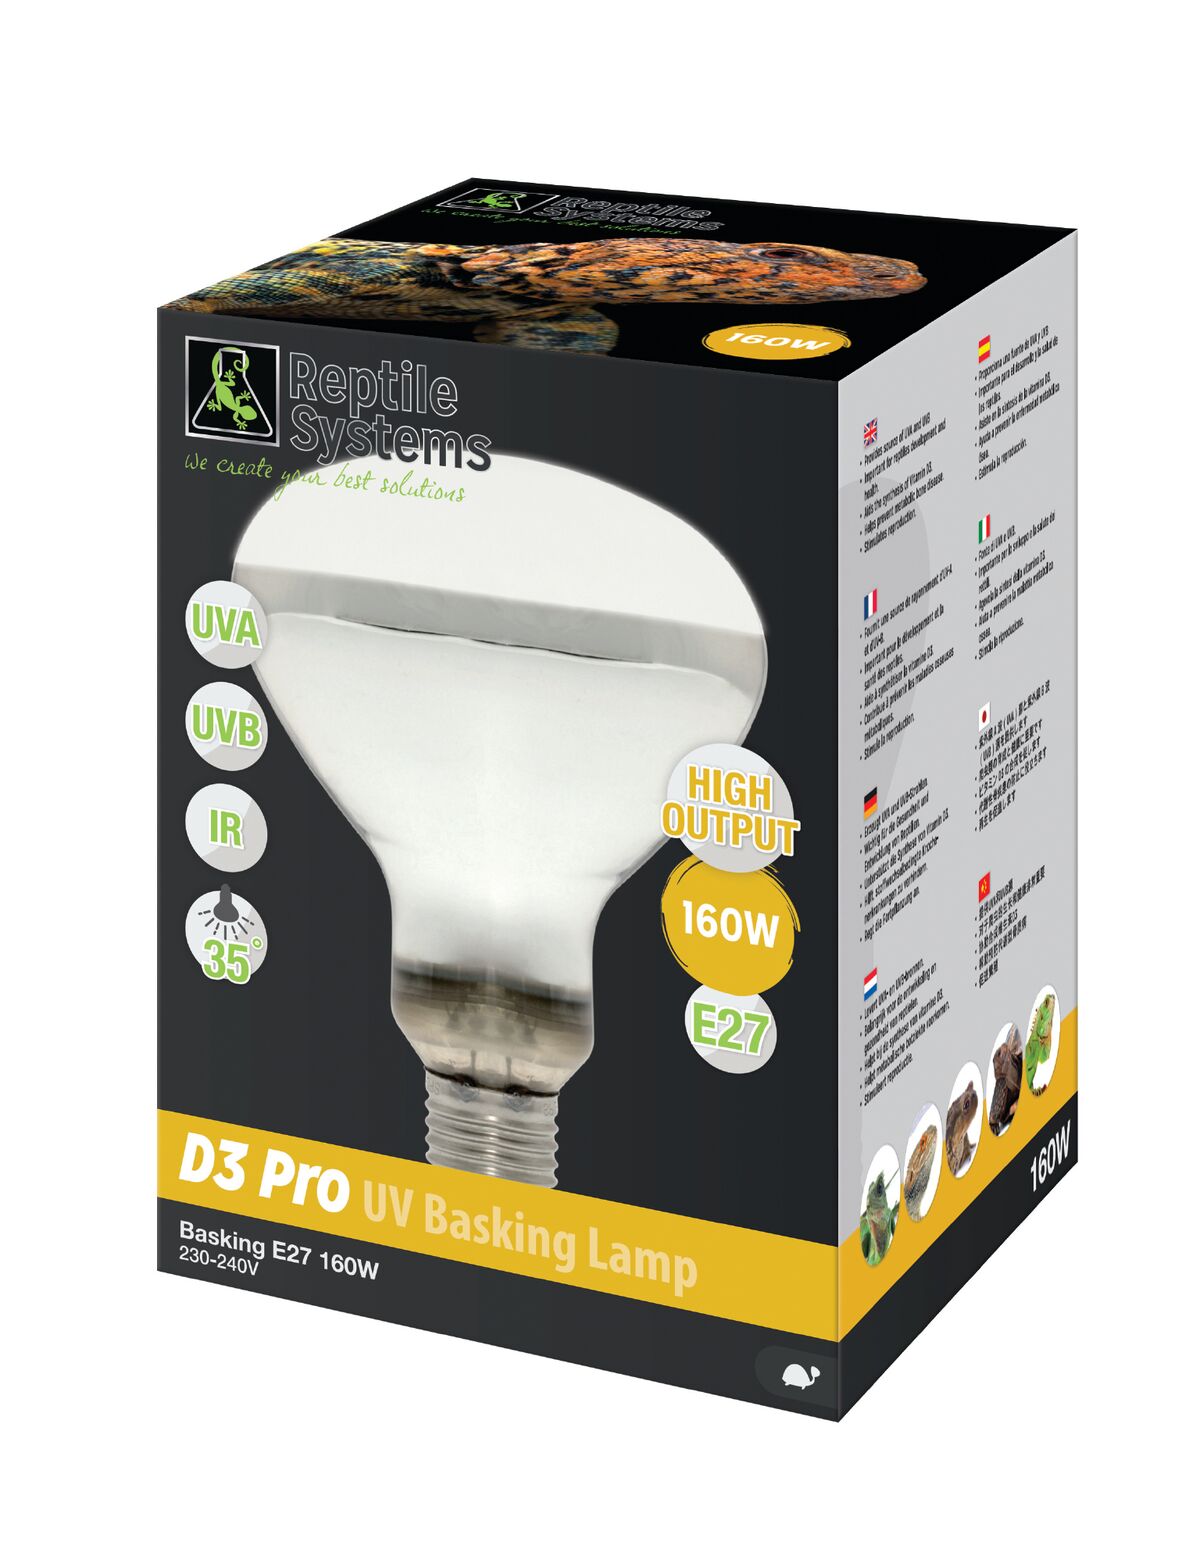 Reptile Systems D3 UV Basking Lamp - 125w